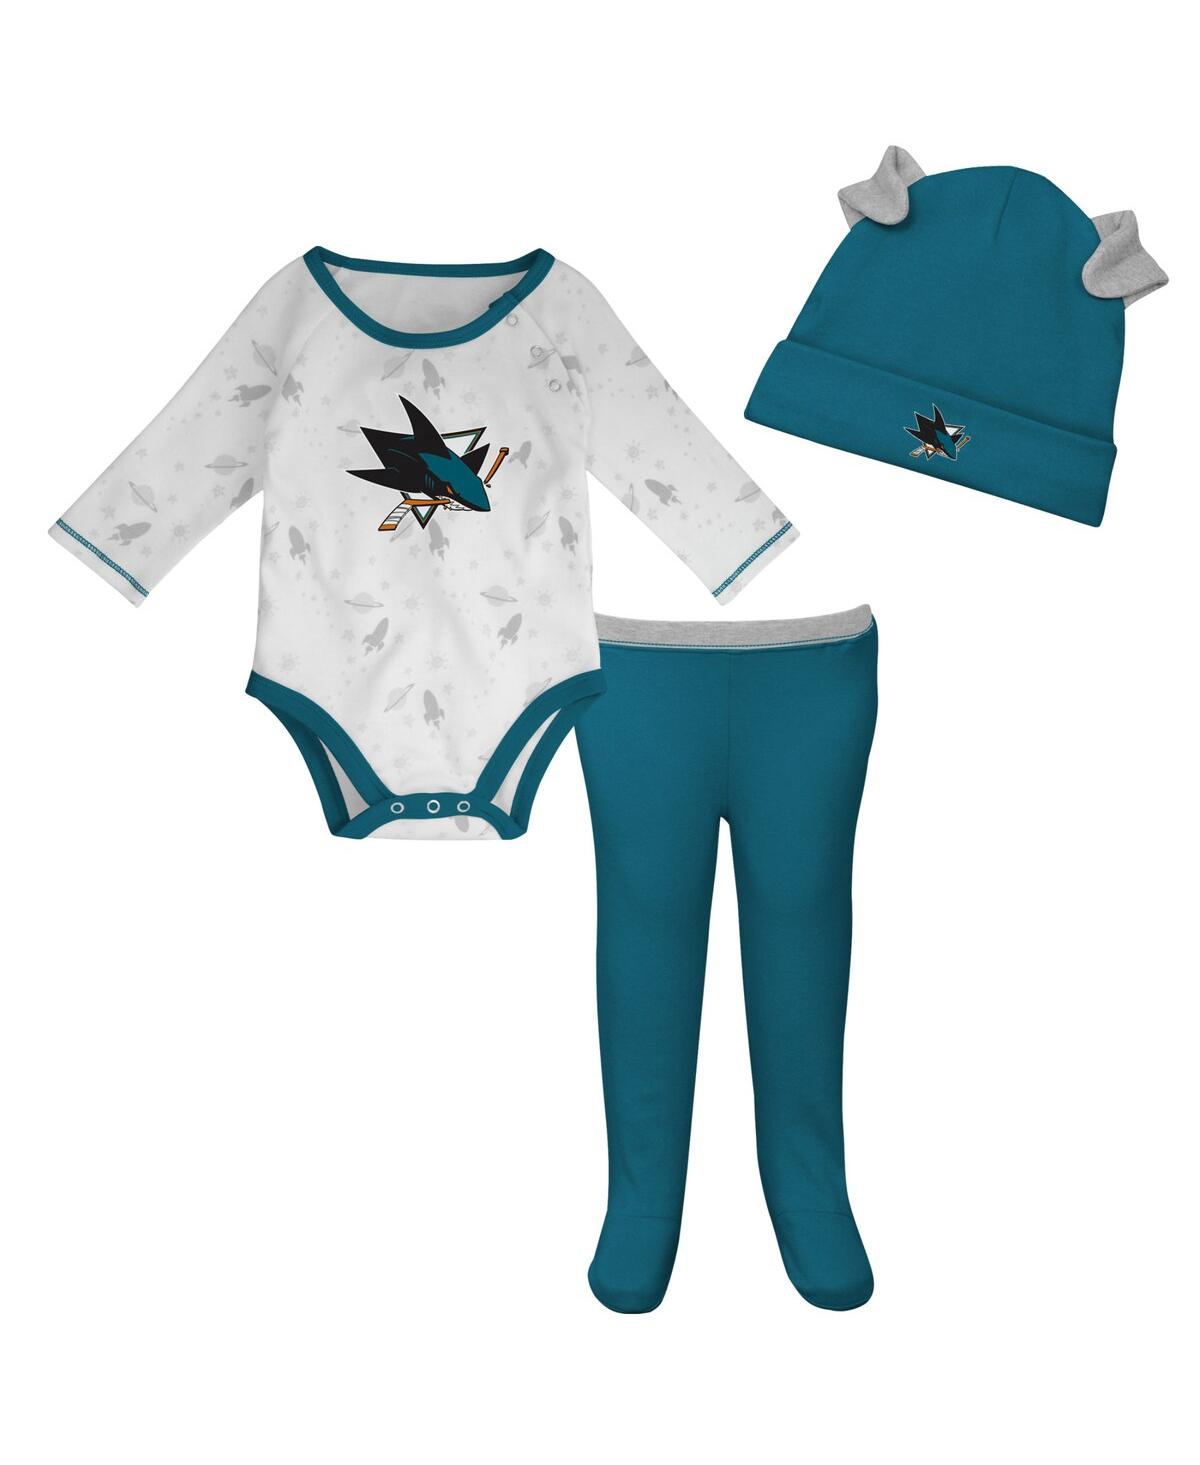 Outerstuff Babies' Newborn And Infant Boys And Girls White, Teal San Jose Sharks Dream Team Hat, Pants And Bodysuit Set In White,teal